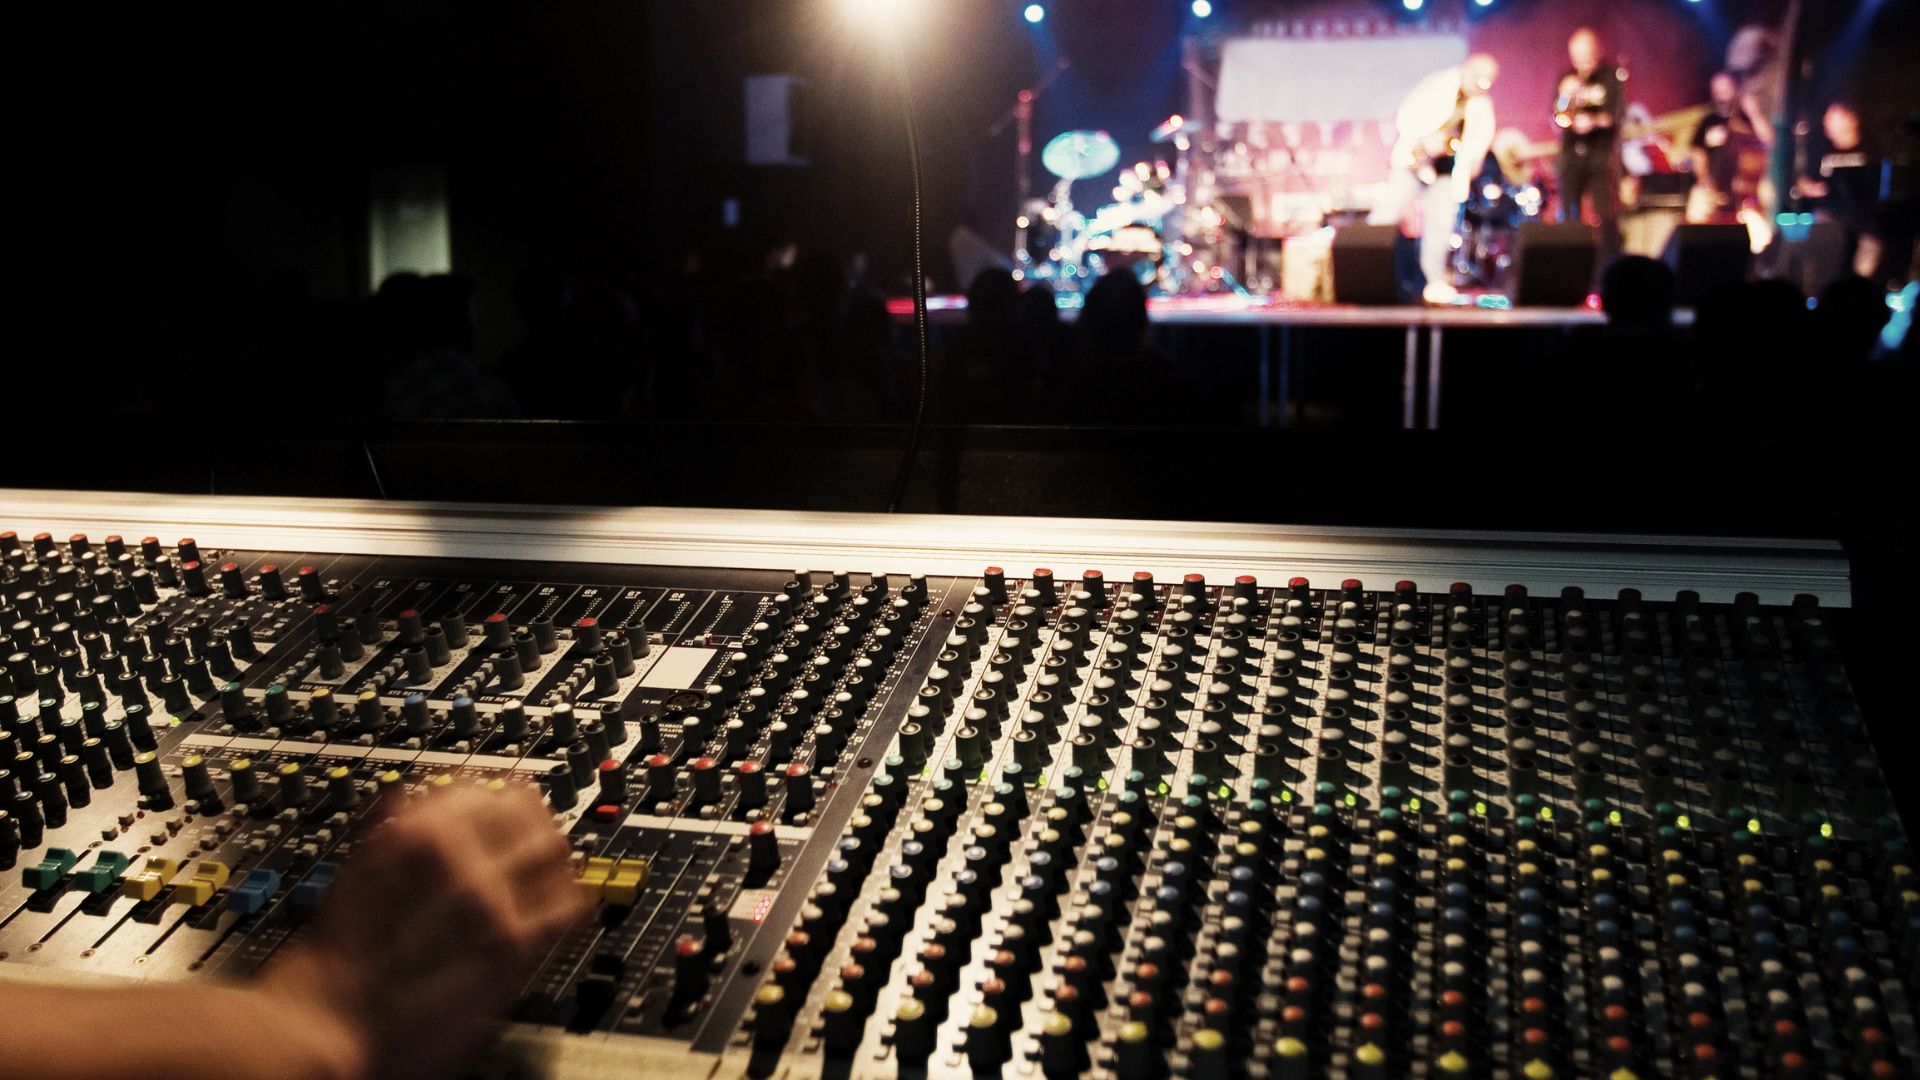 image showing a sound technician sitting in front of an audio control board in an auditorium